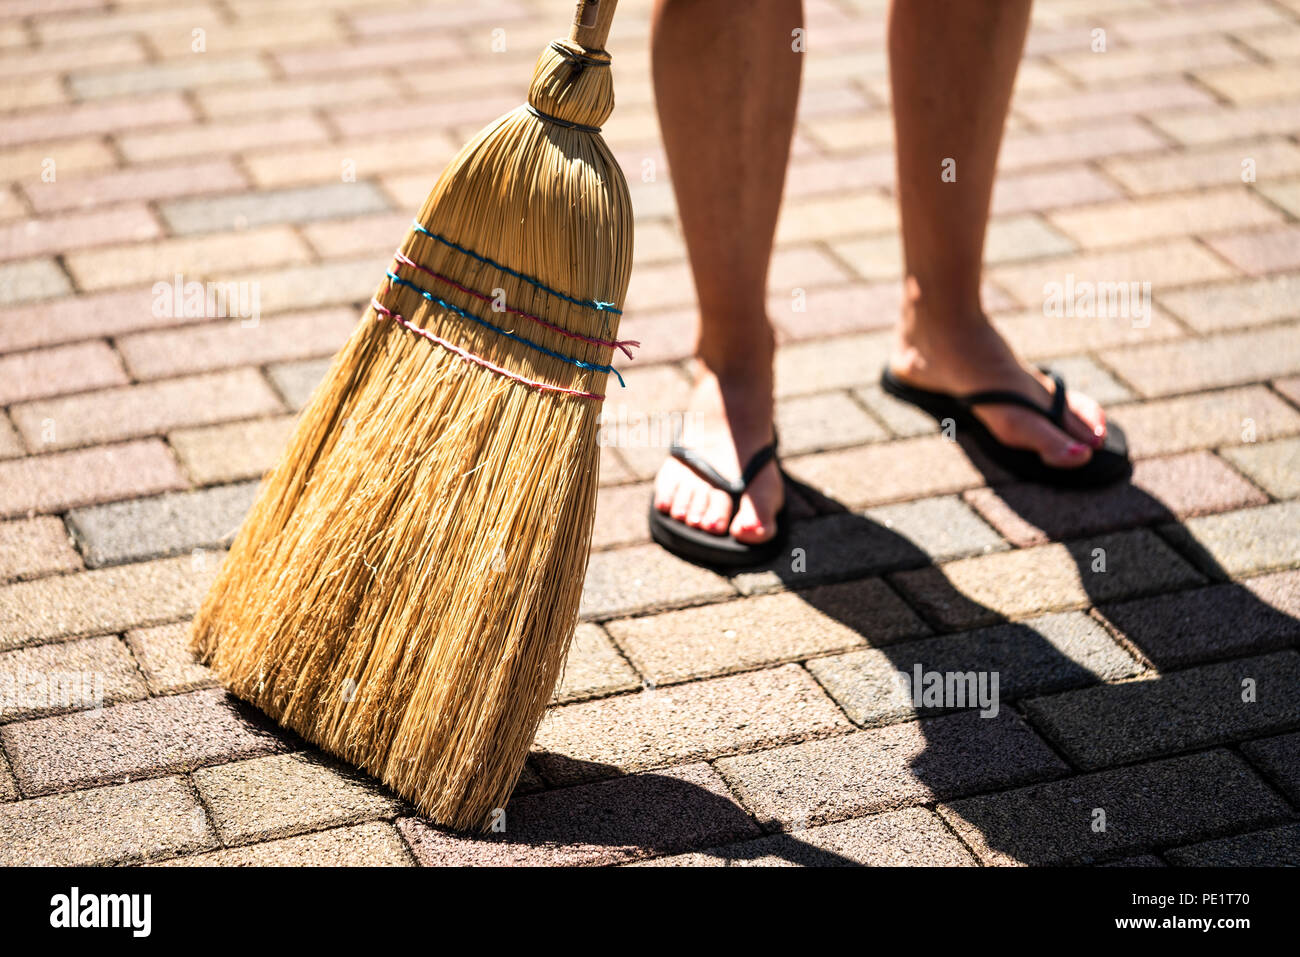 Young woman is sweeping the ground with a broom. Stock Photo